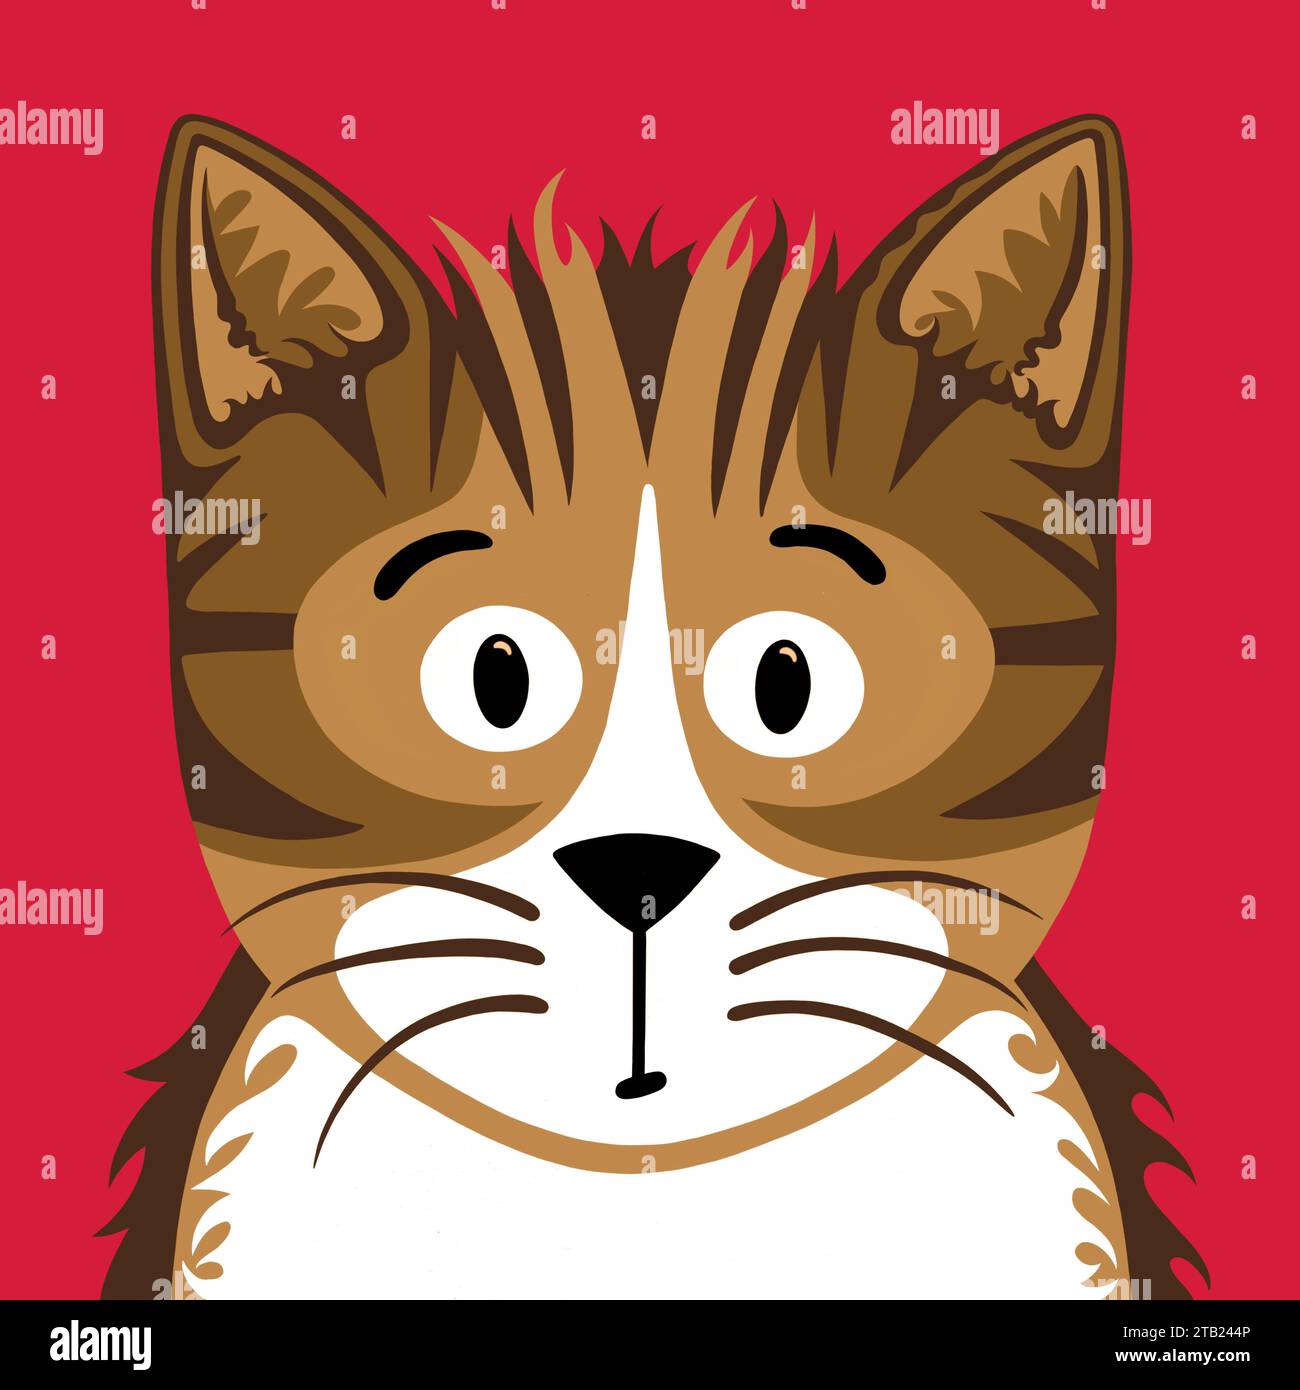 Cute ginger cat illustration in a contemporary cartoon style. Loveable ginger kitten, with striped markings and cute long whiskers. Furry friend pet. Stock Photo